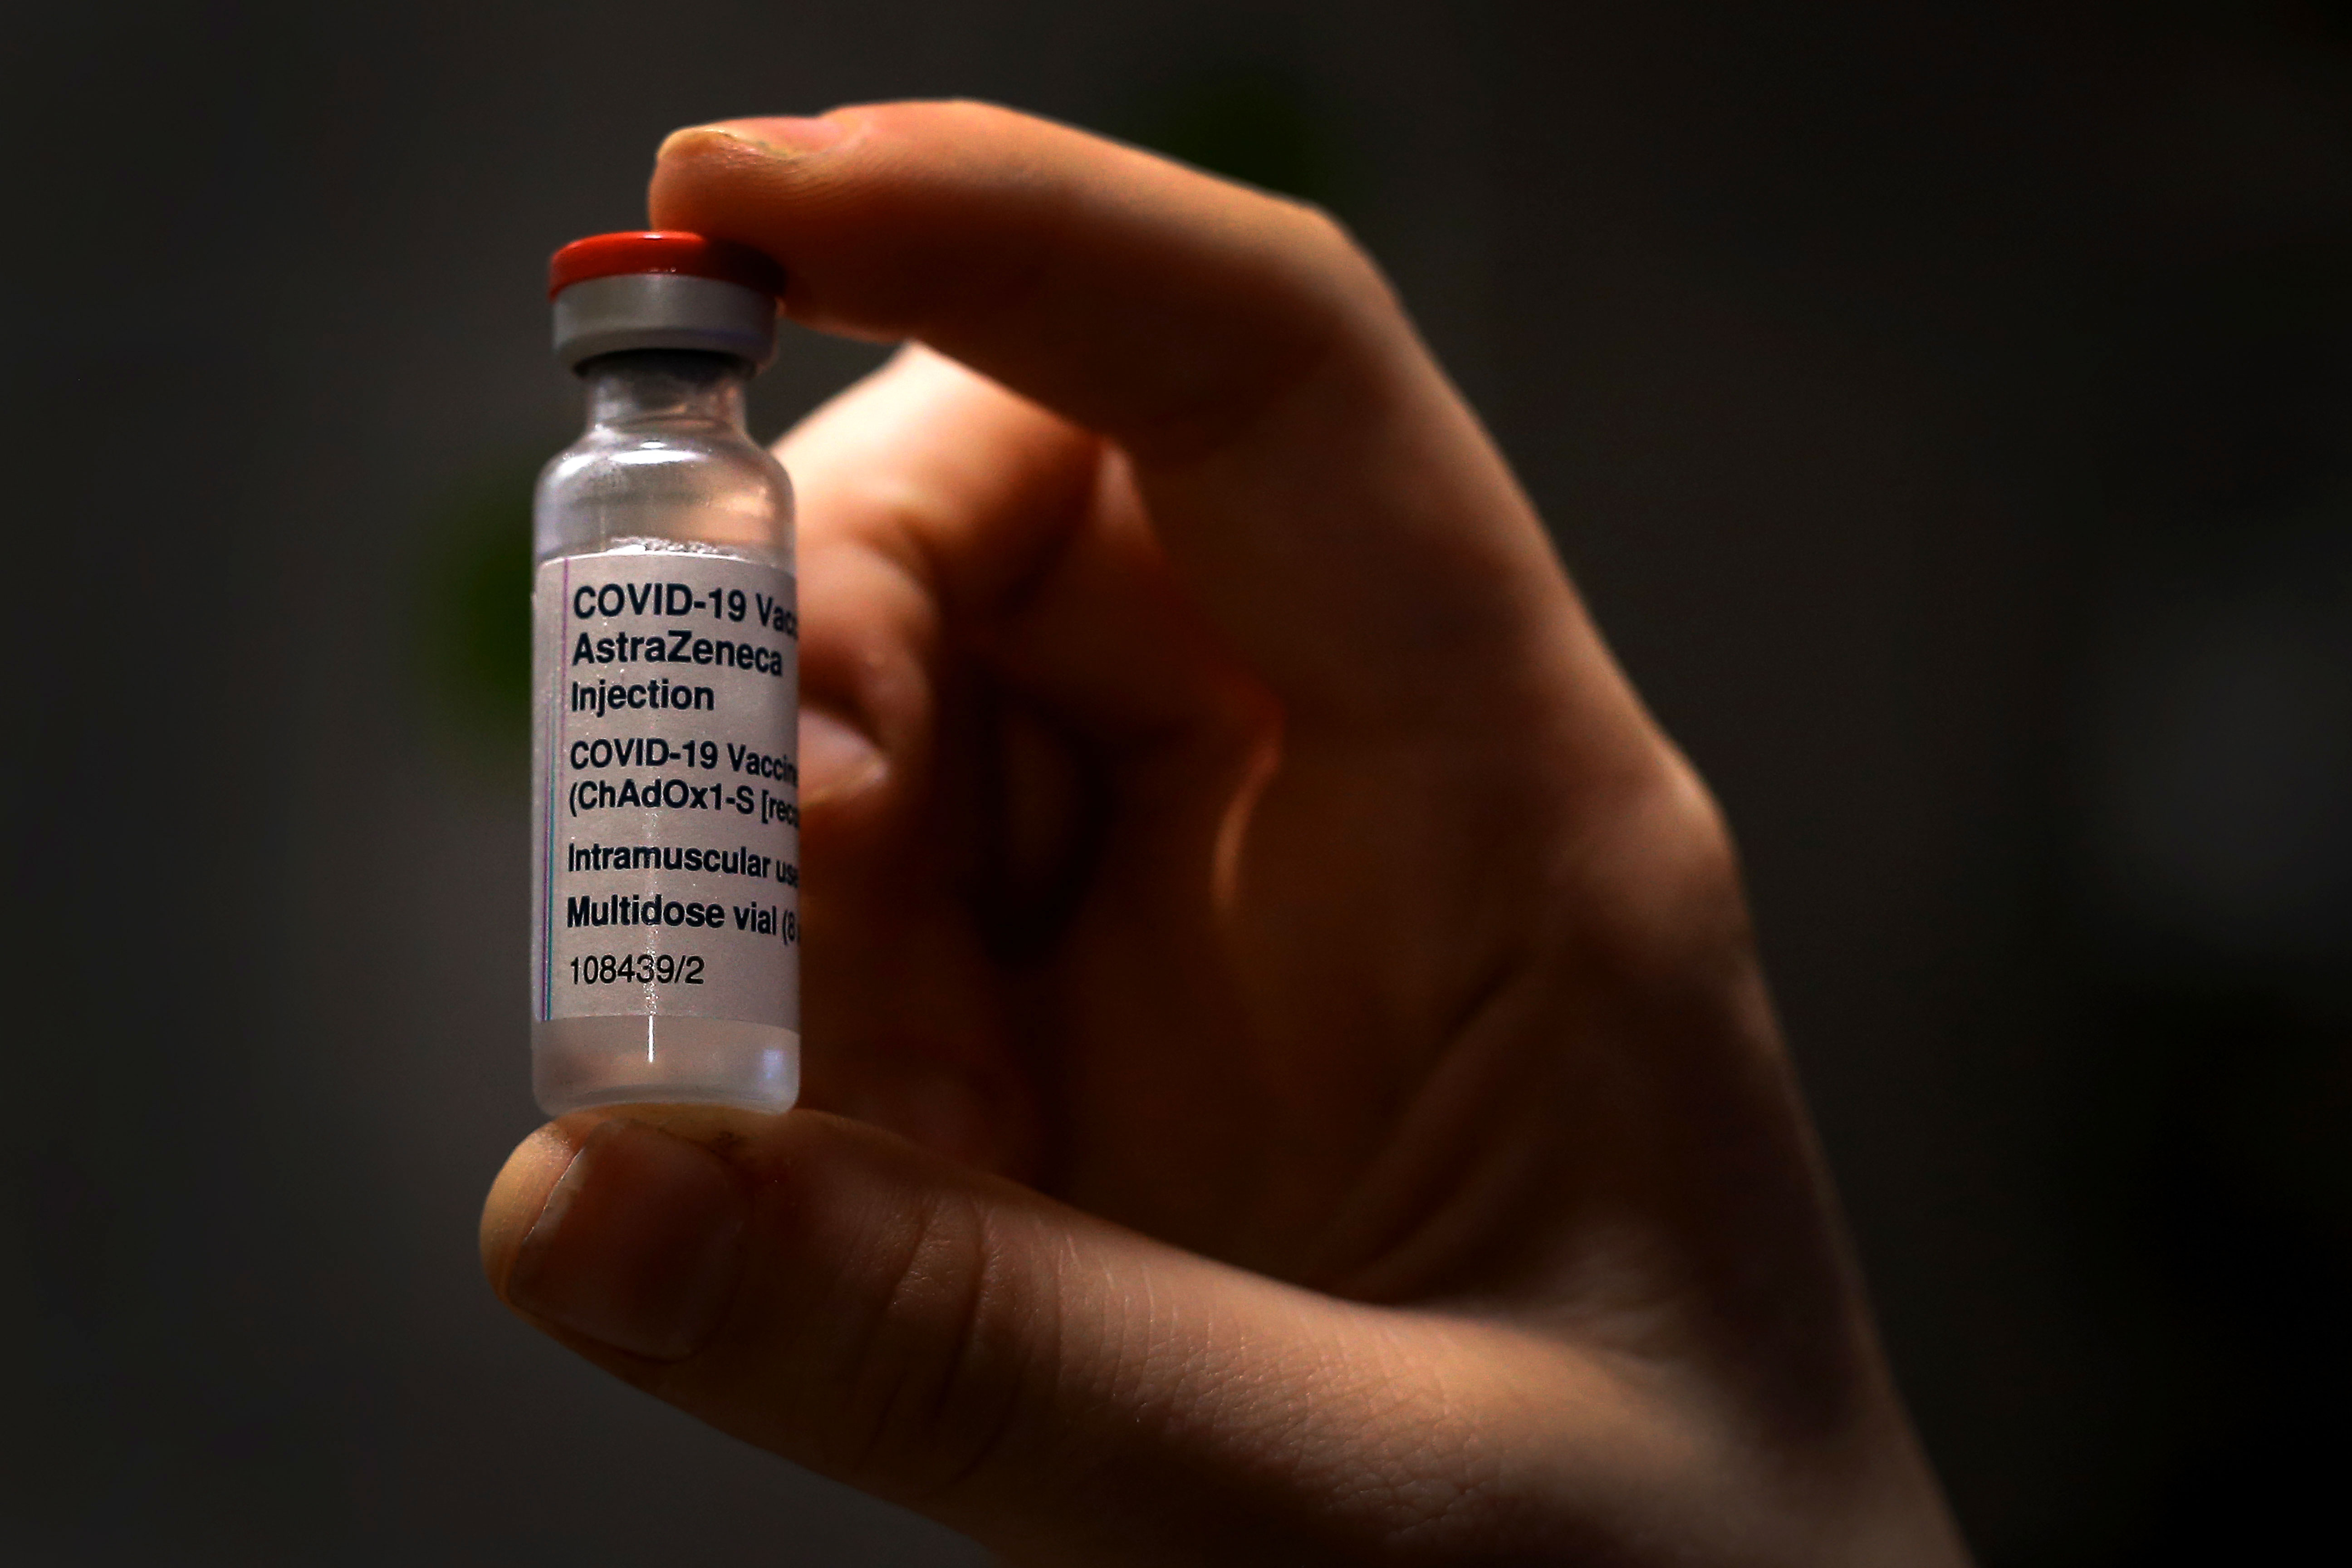 A nurse holds a vial of the AstraZeneca Covid-19 vaccine on March 23 in Sydney.